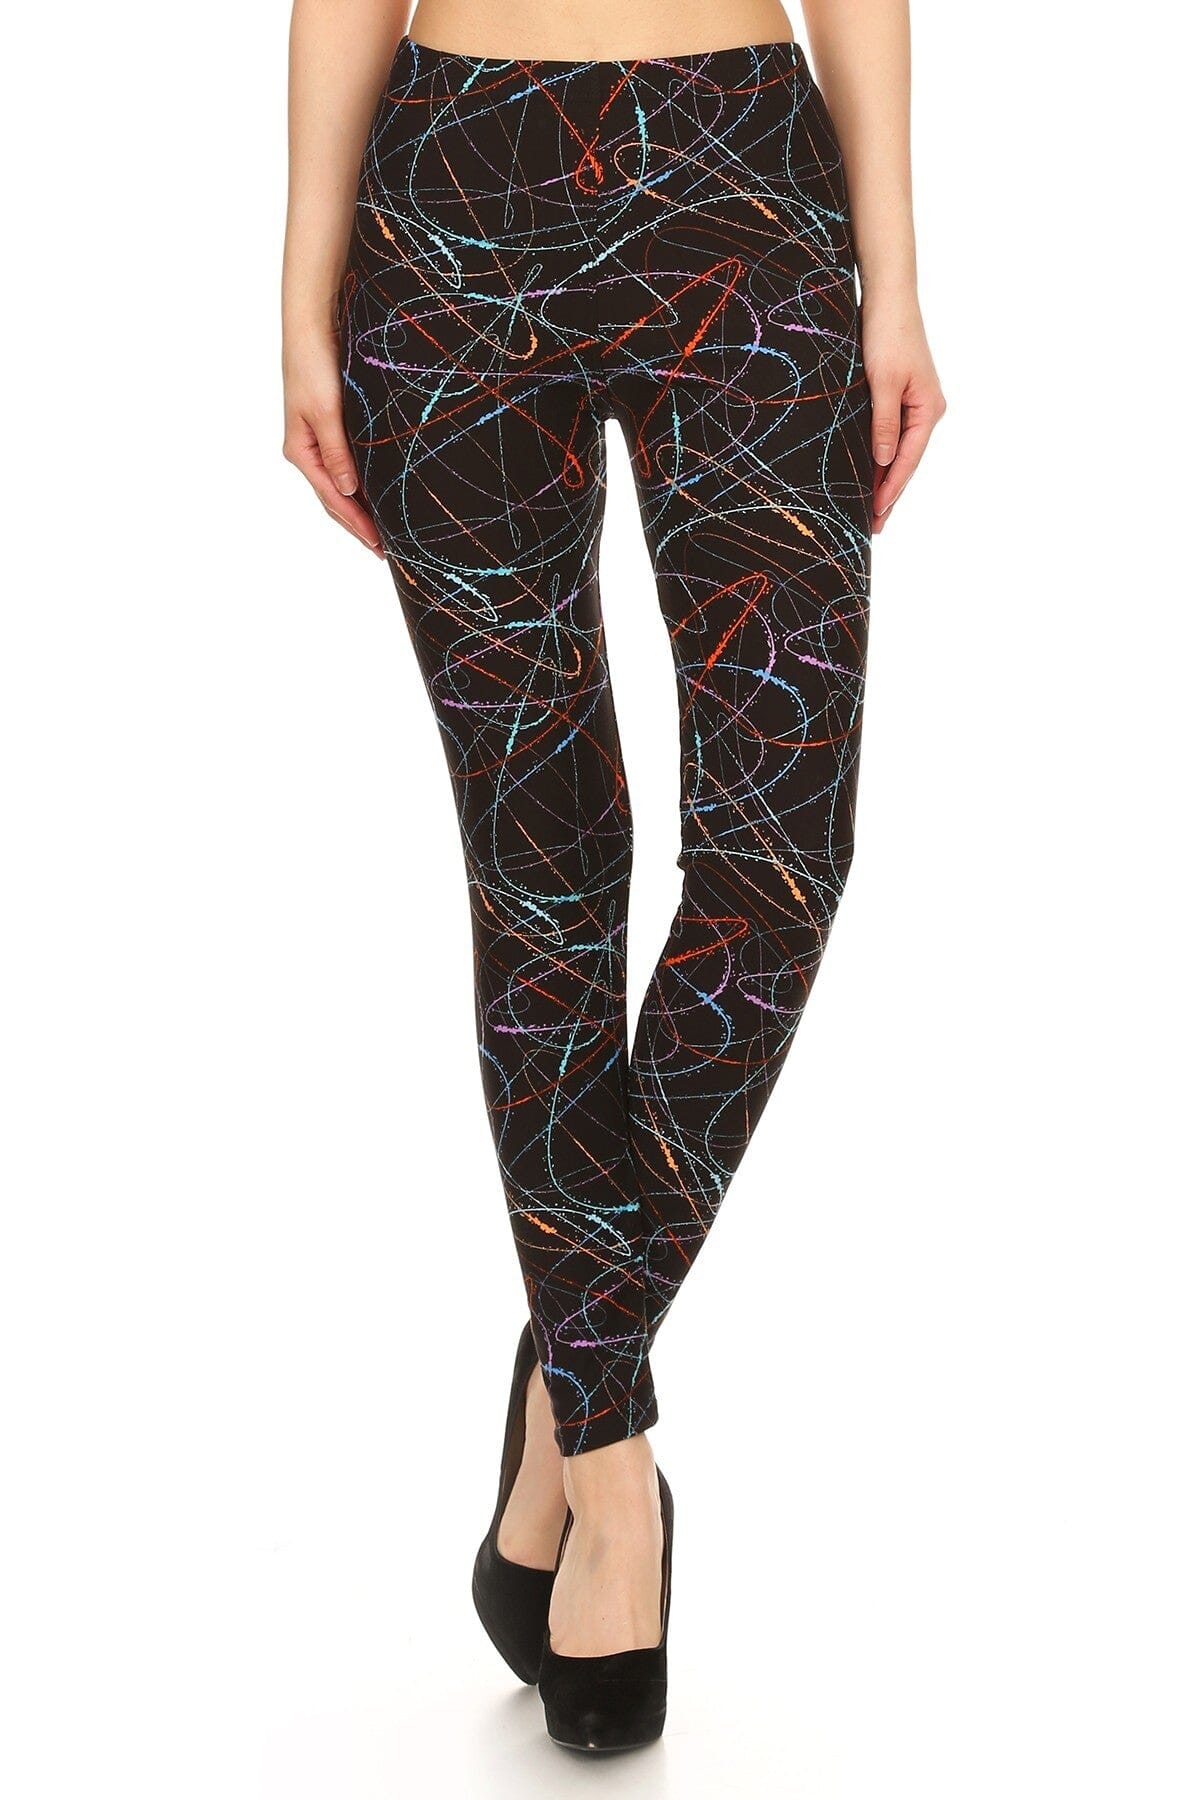 Multicolored Scribble Print, High Waisted Leggings In A Fitted Style With And Elastic Waist Bottoms jehouze 